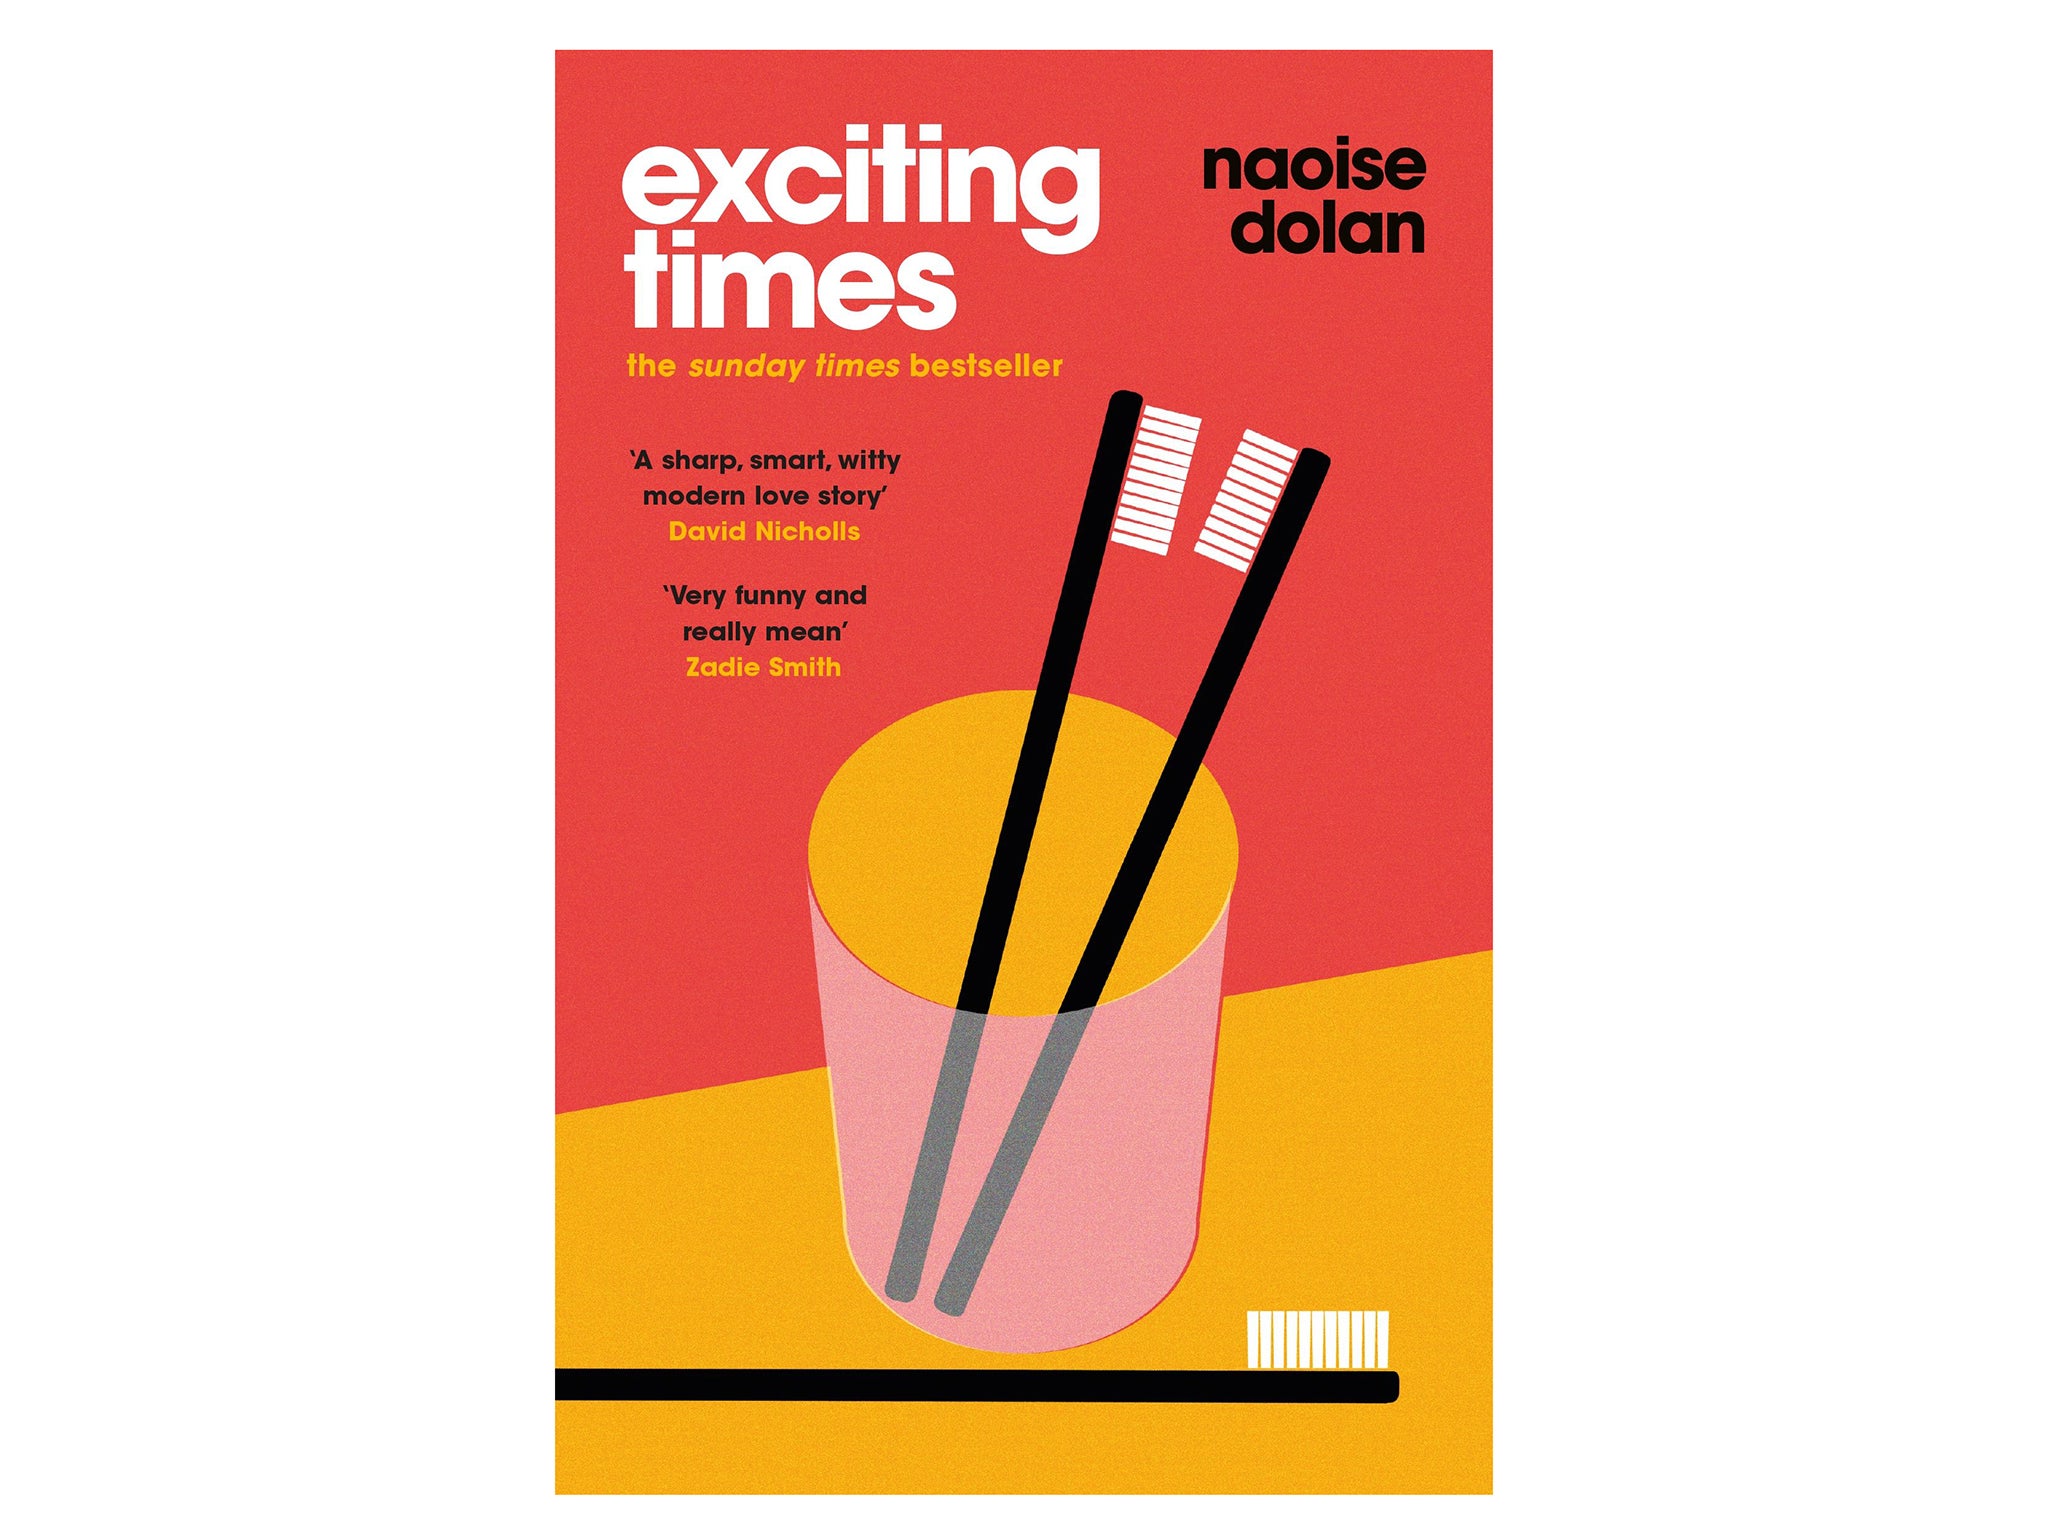 Exciting-Times-Naoise-Dolan-womens-prize-for-fiction-indybest.jpg